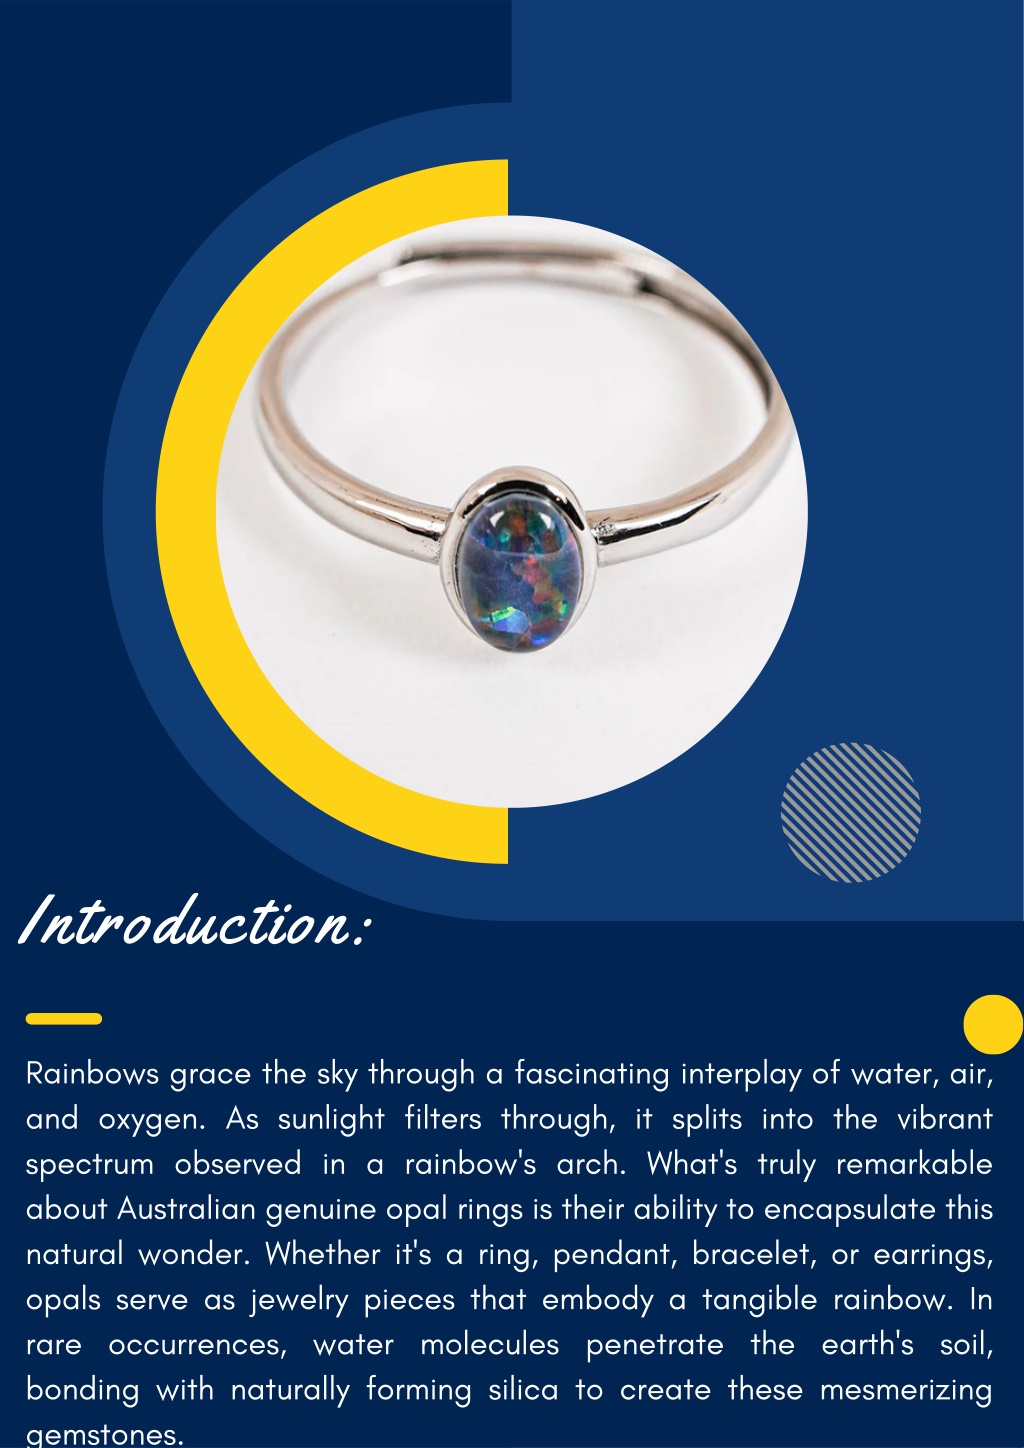 PPT - Different Types of genuine opal rings PowerPoint Presentation ...